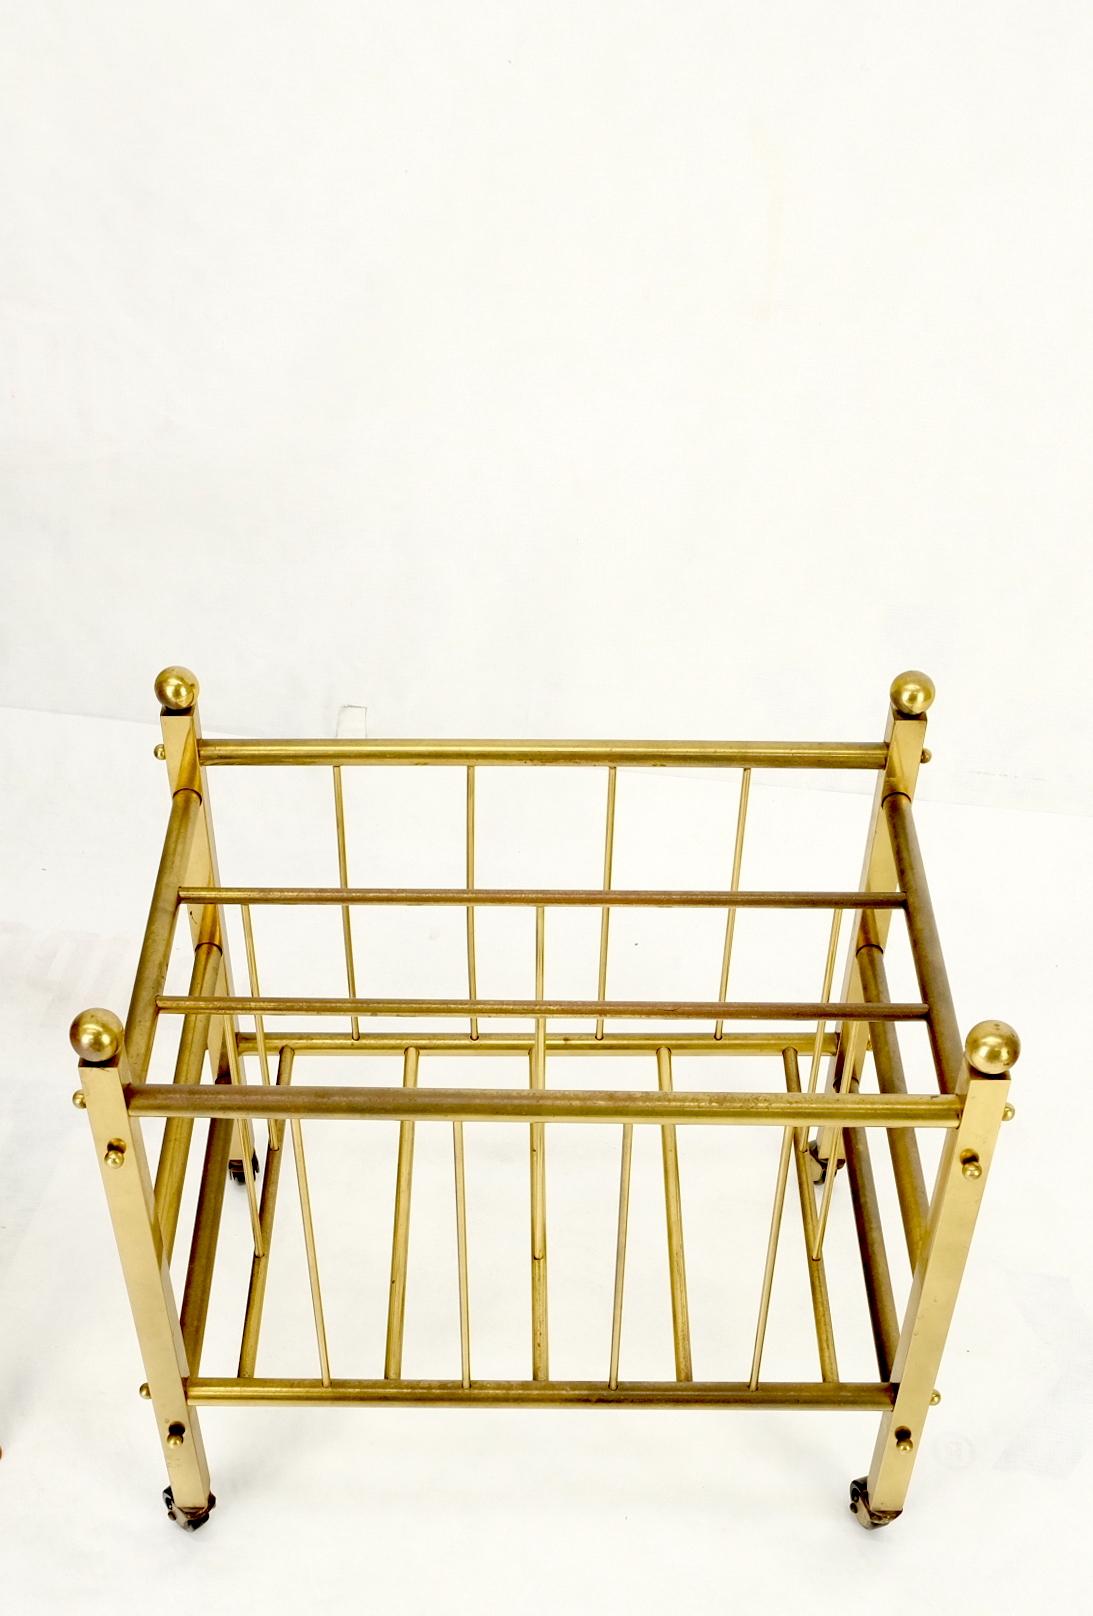 Solid Brass Tube Design Mid-Century Modern Magazine Stand on Casters For Sale 9